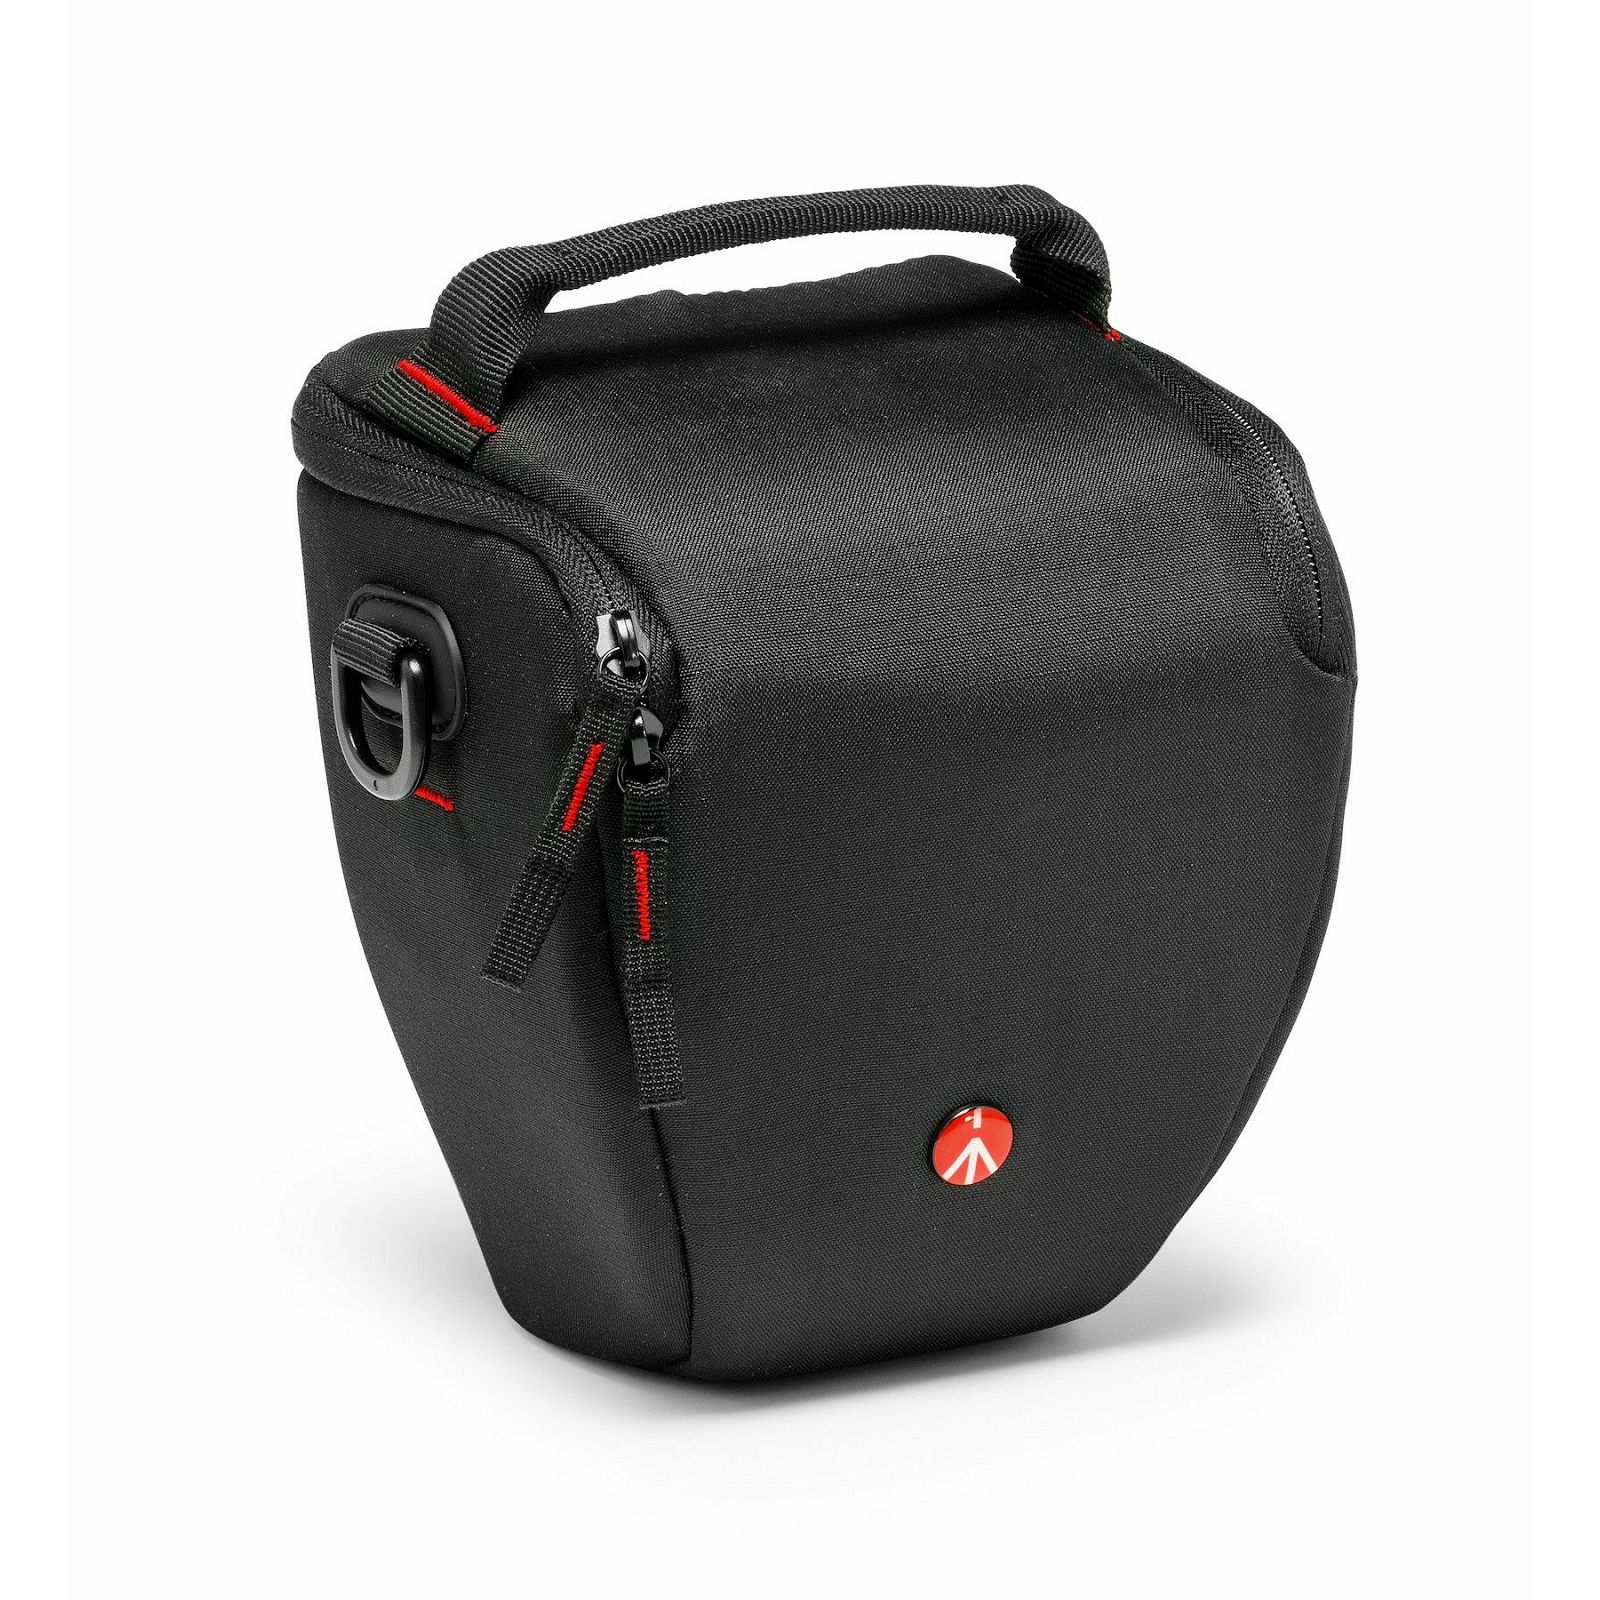 Manfrotto Essential torba crna bags Holster S/E Black MB H-S-E